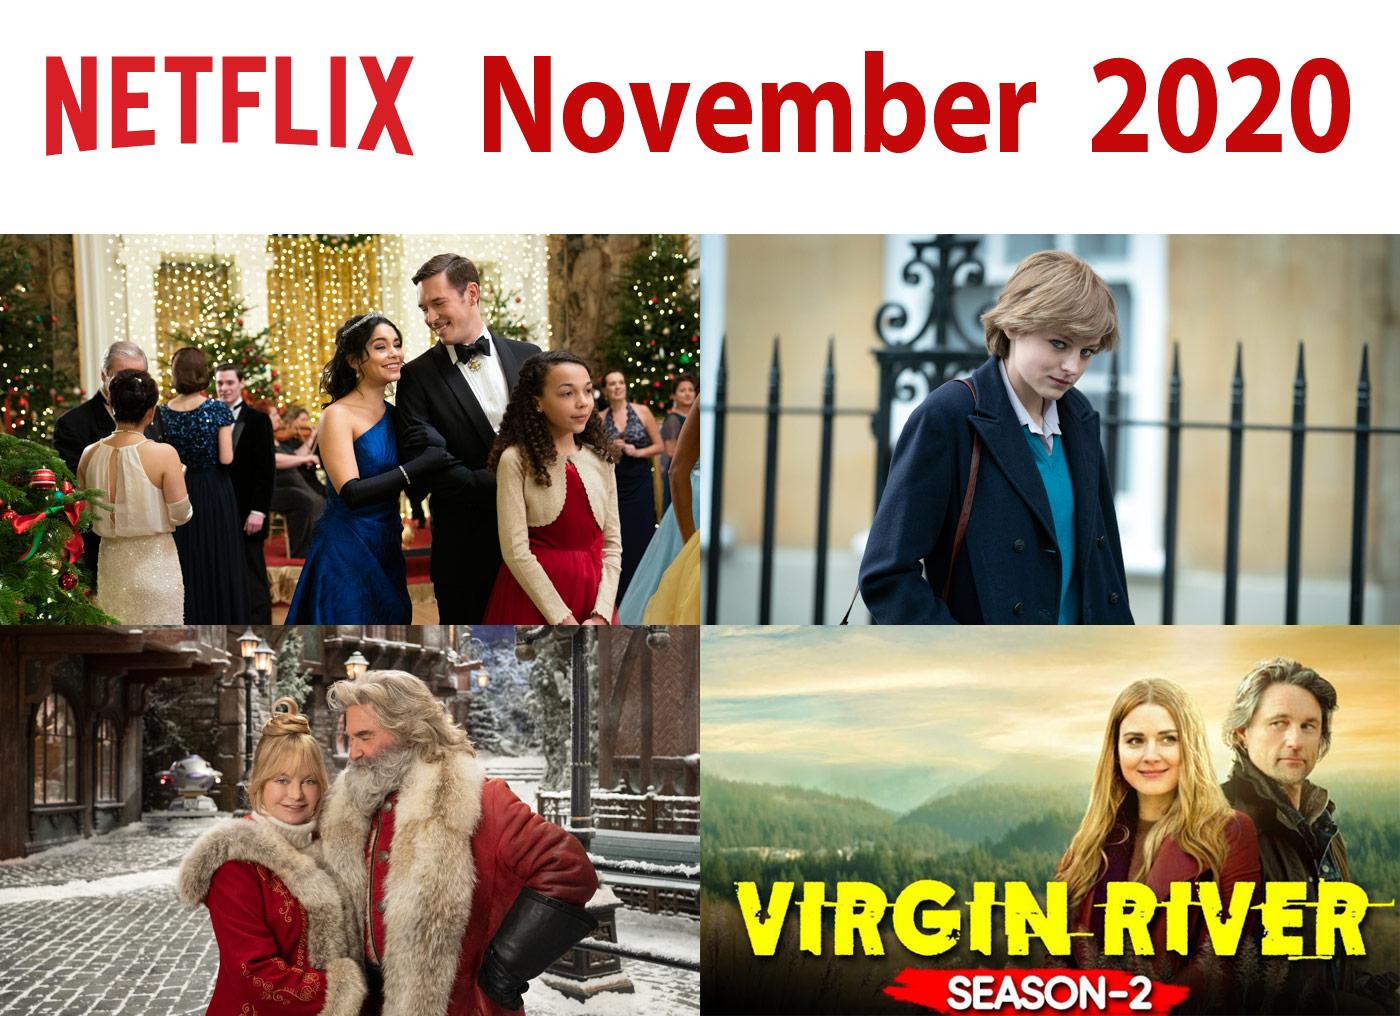 What's new to watch on Netflix Canada for November 2020